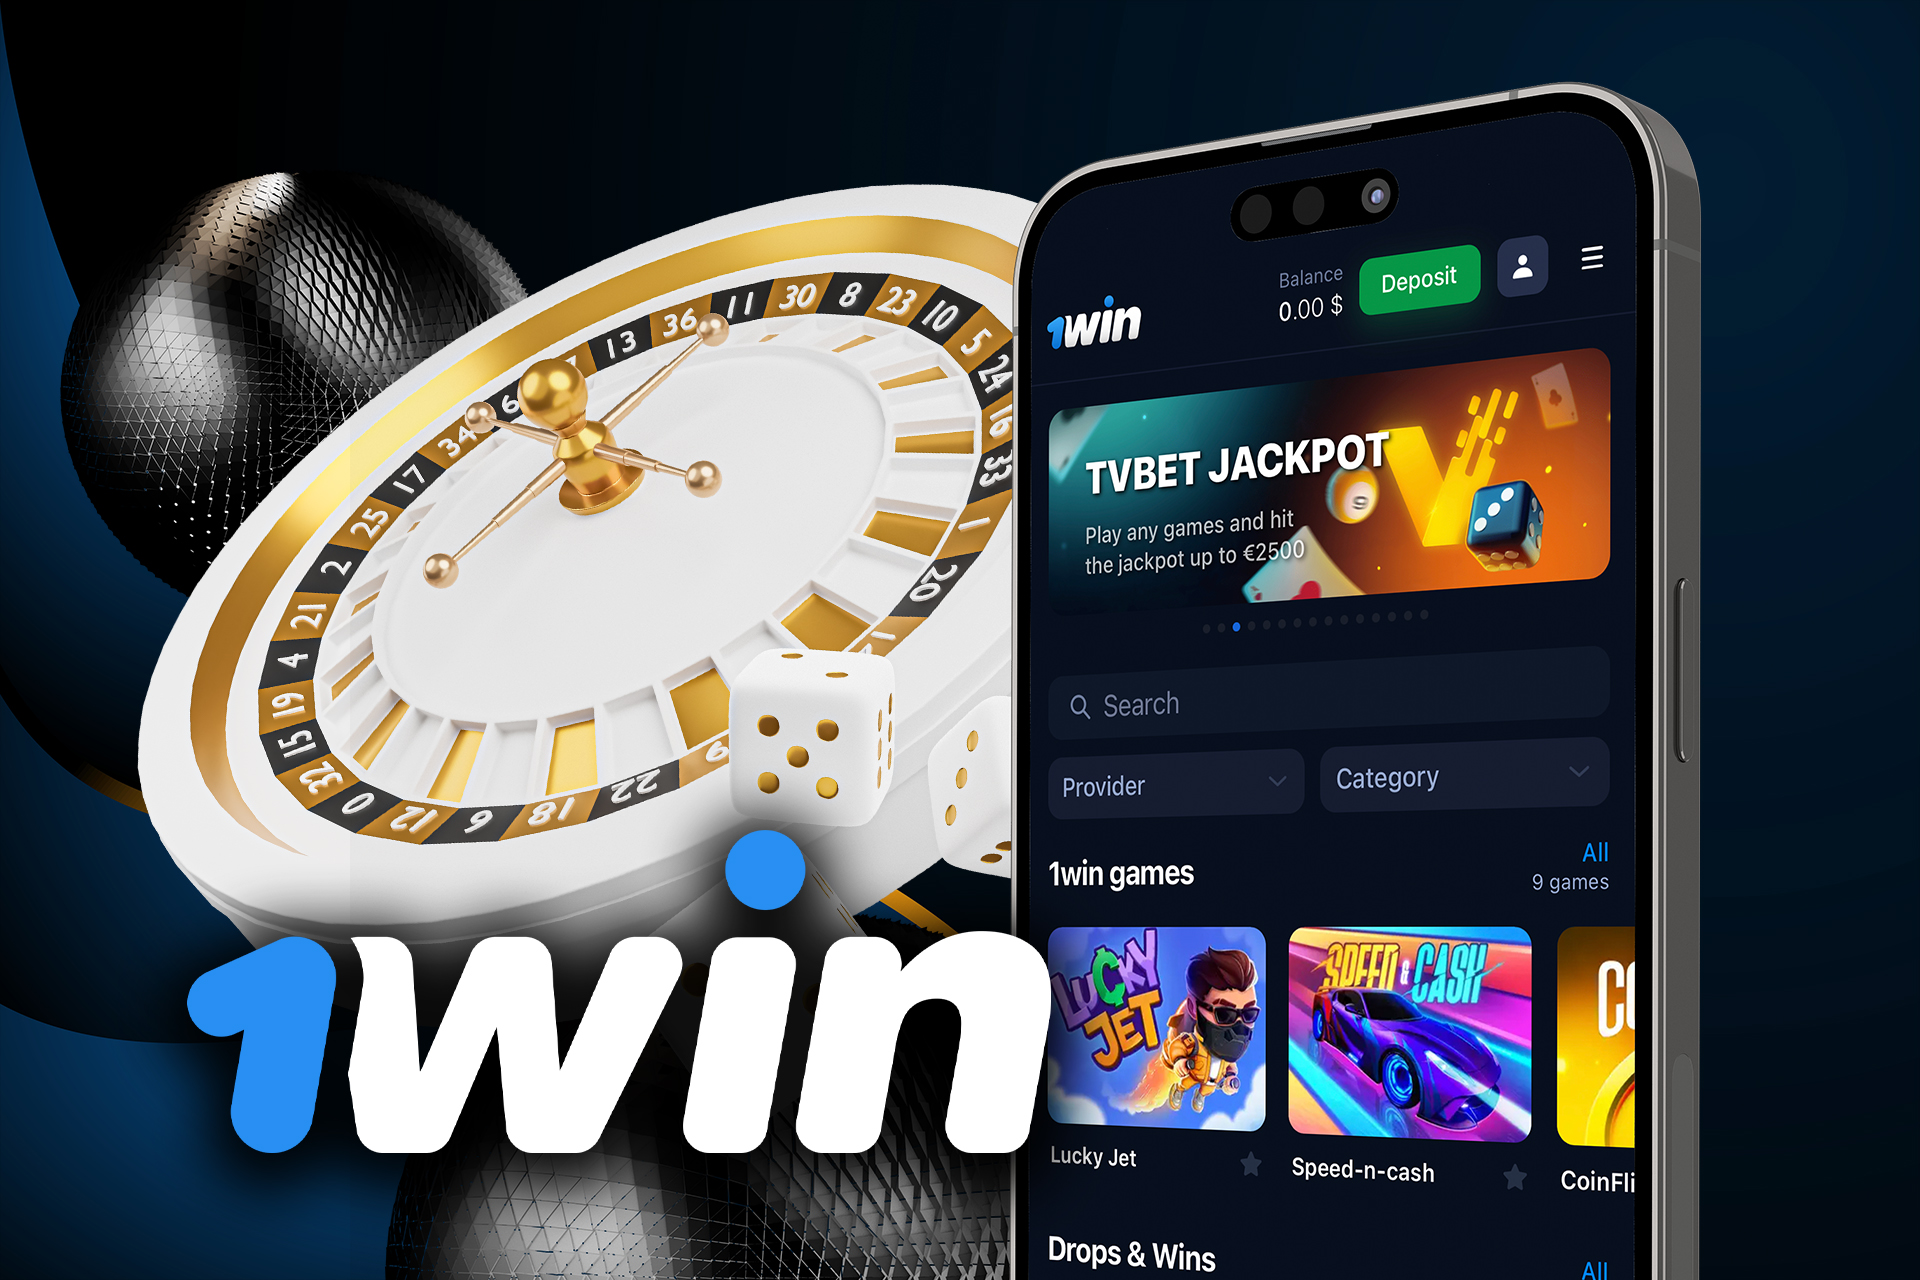 In the 1win app you can also play oline casino games.